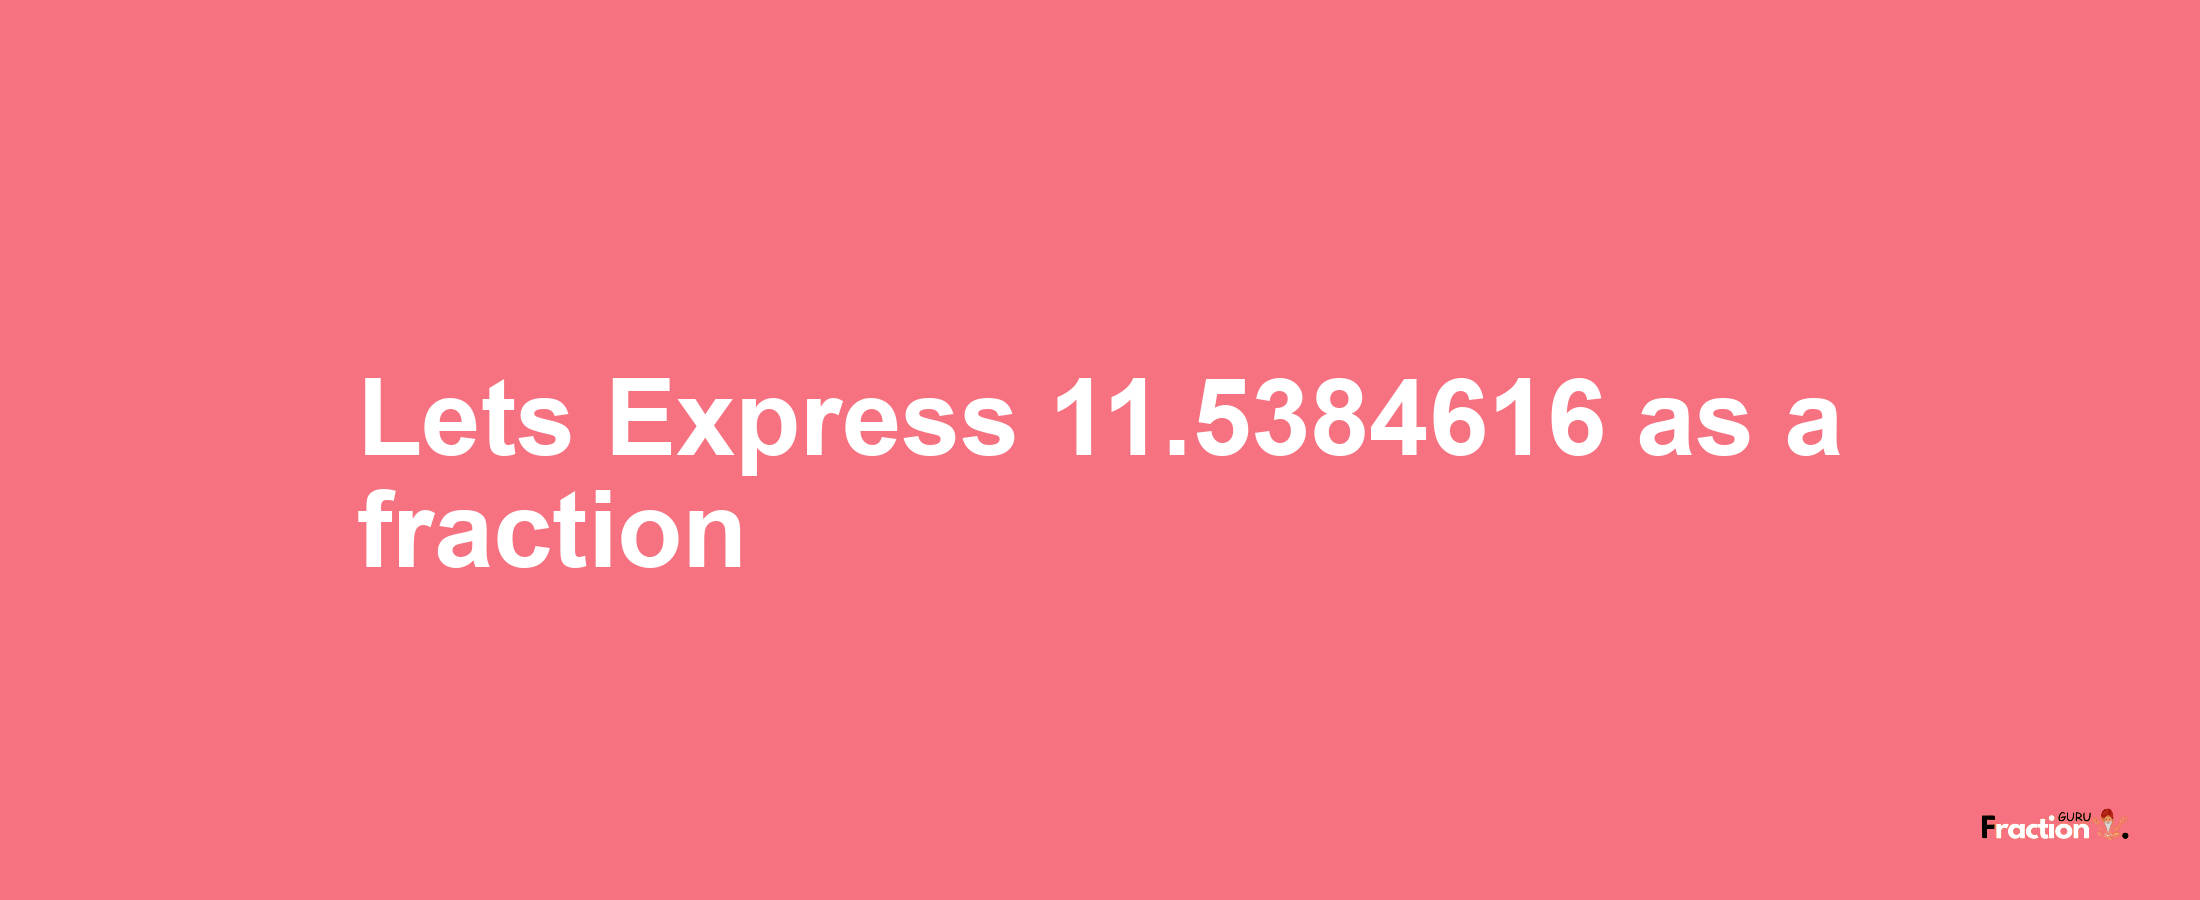 Lets Express 11.5384616 as afraction